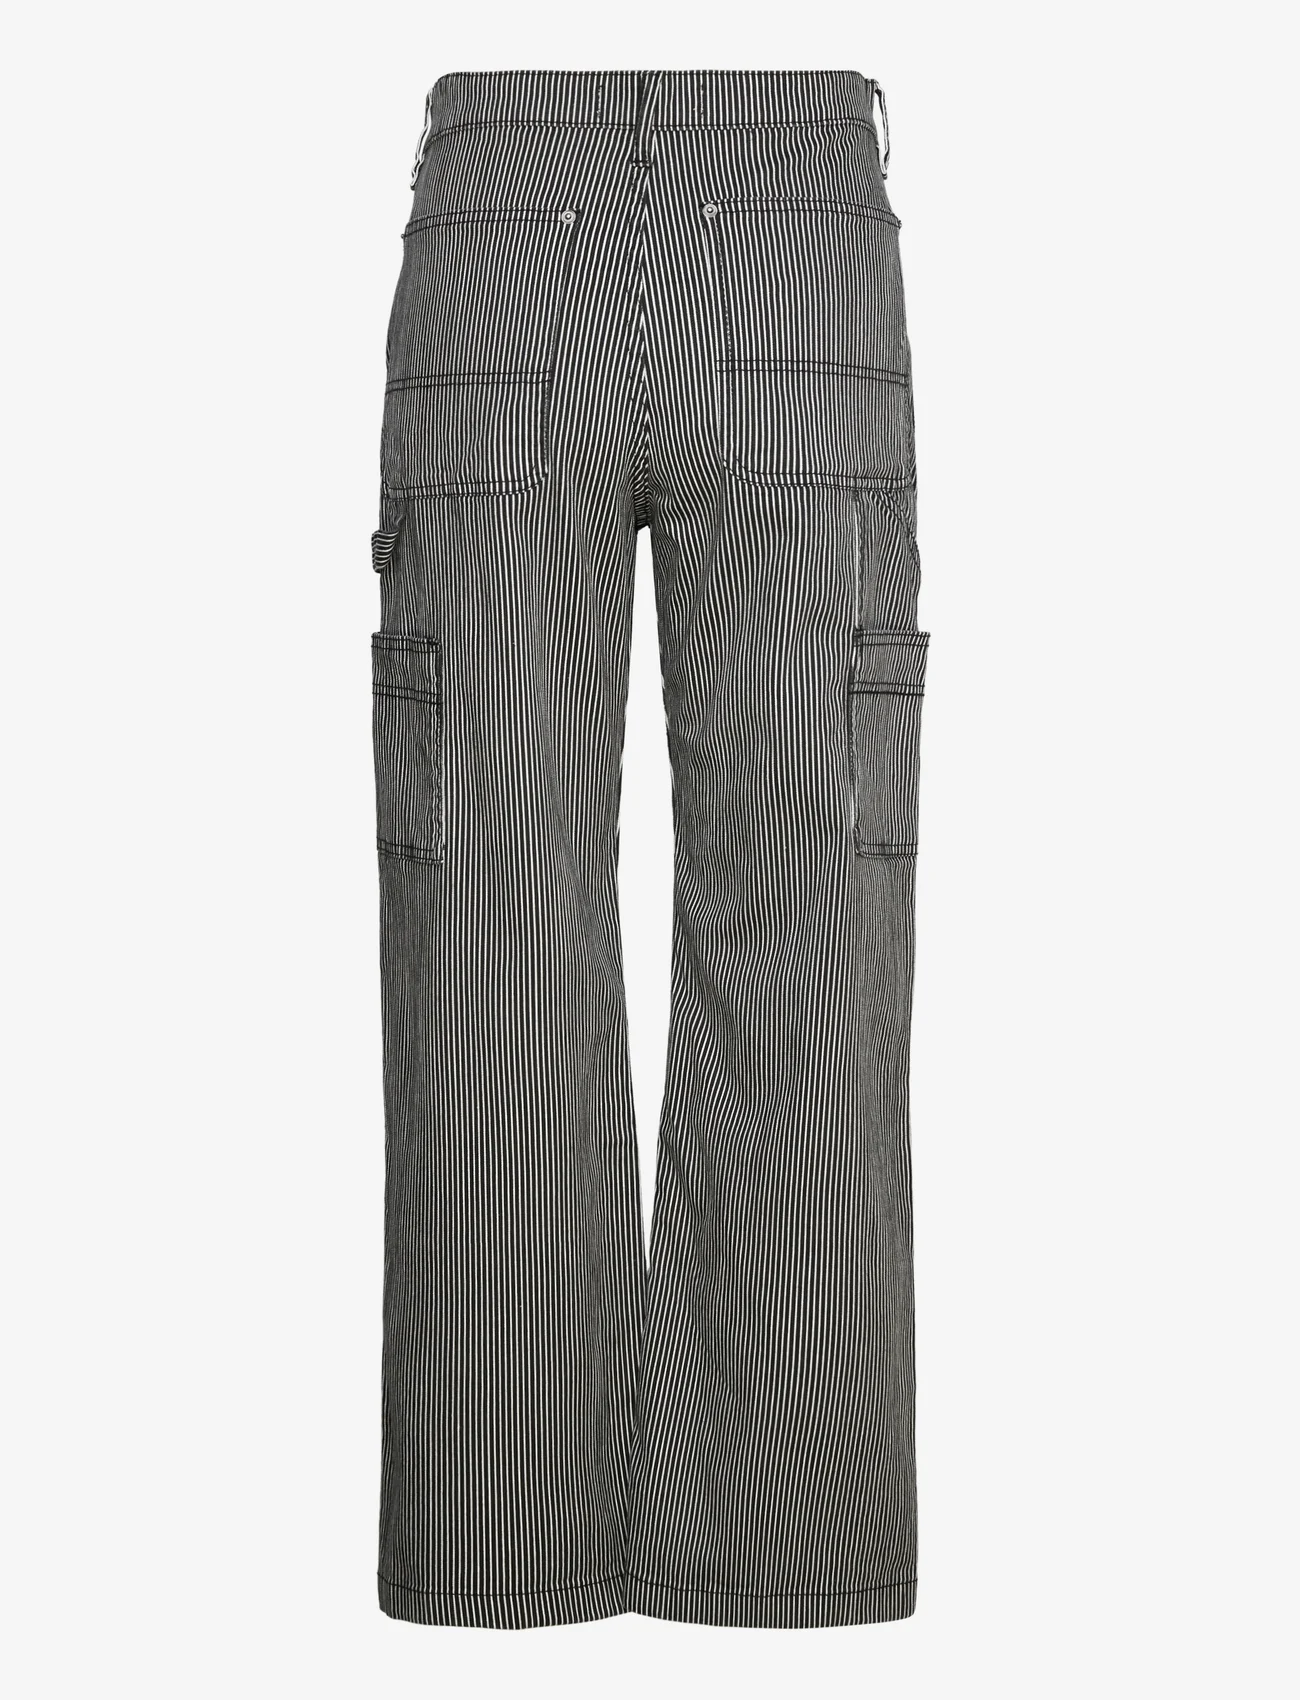 Sofie Schnoor - Trousers - brede jeans - white black striped - 1